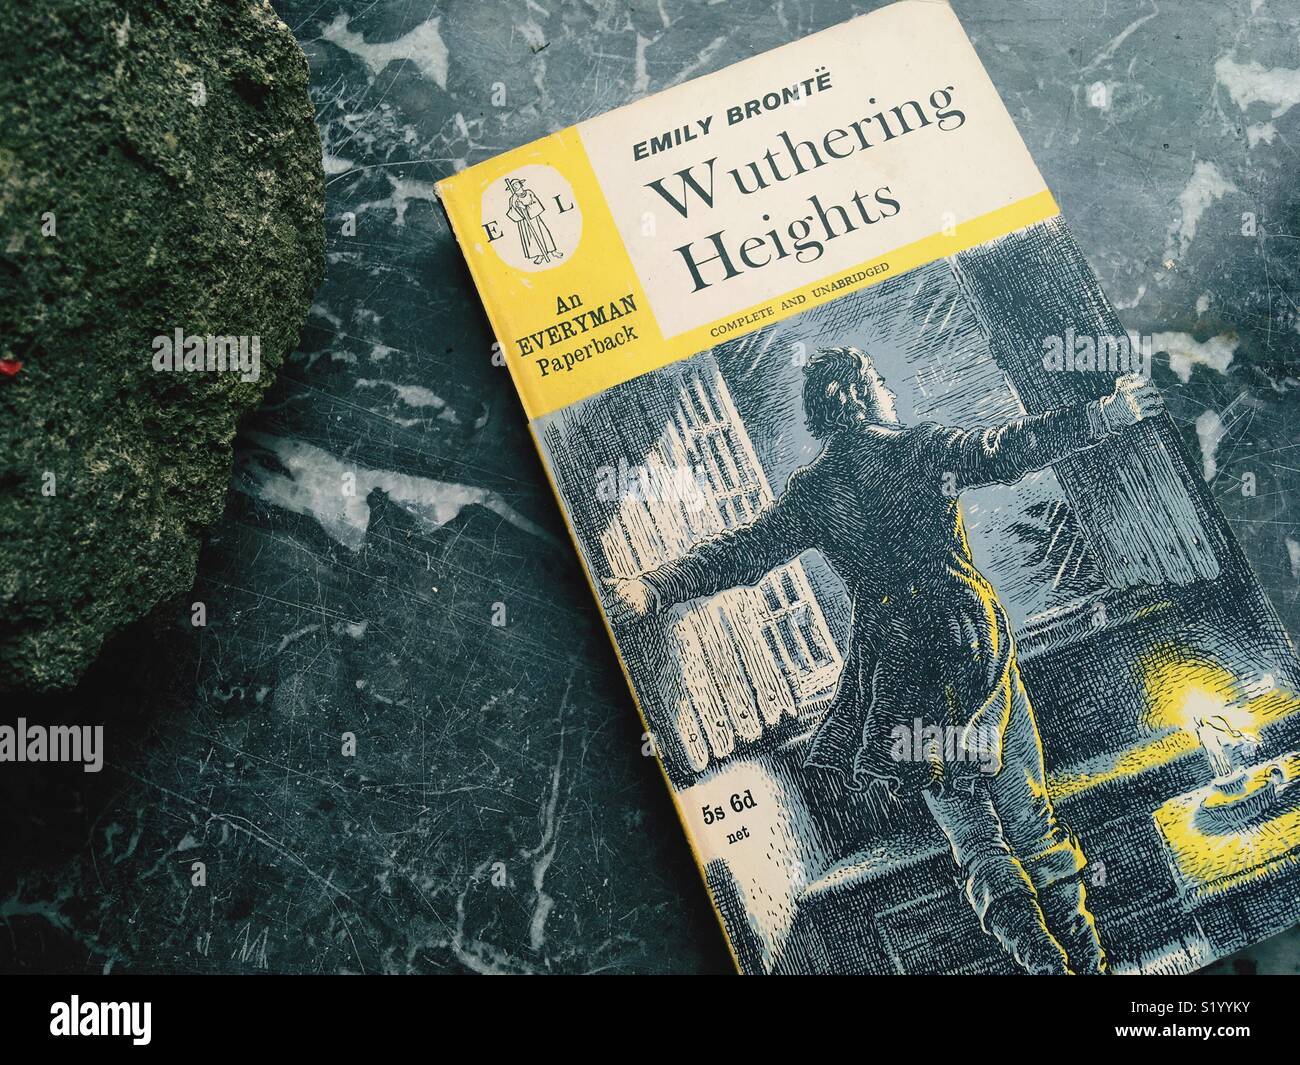 Wuthering Heights paperback Foto Stock